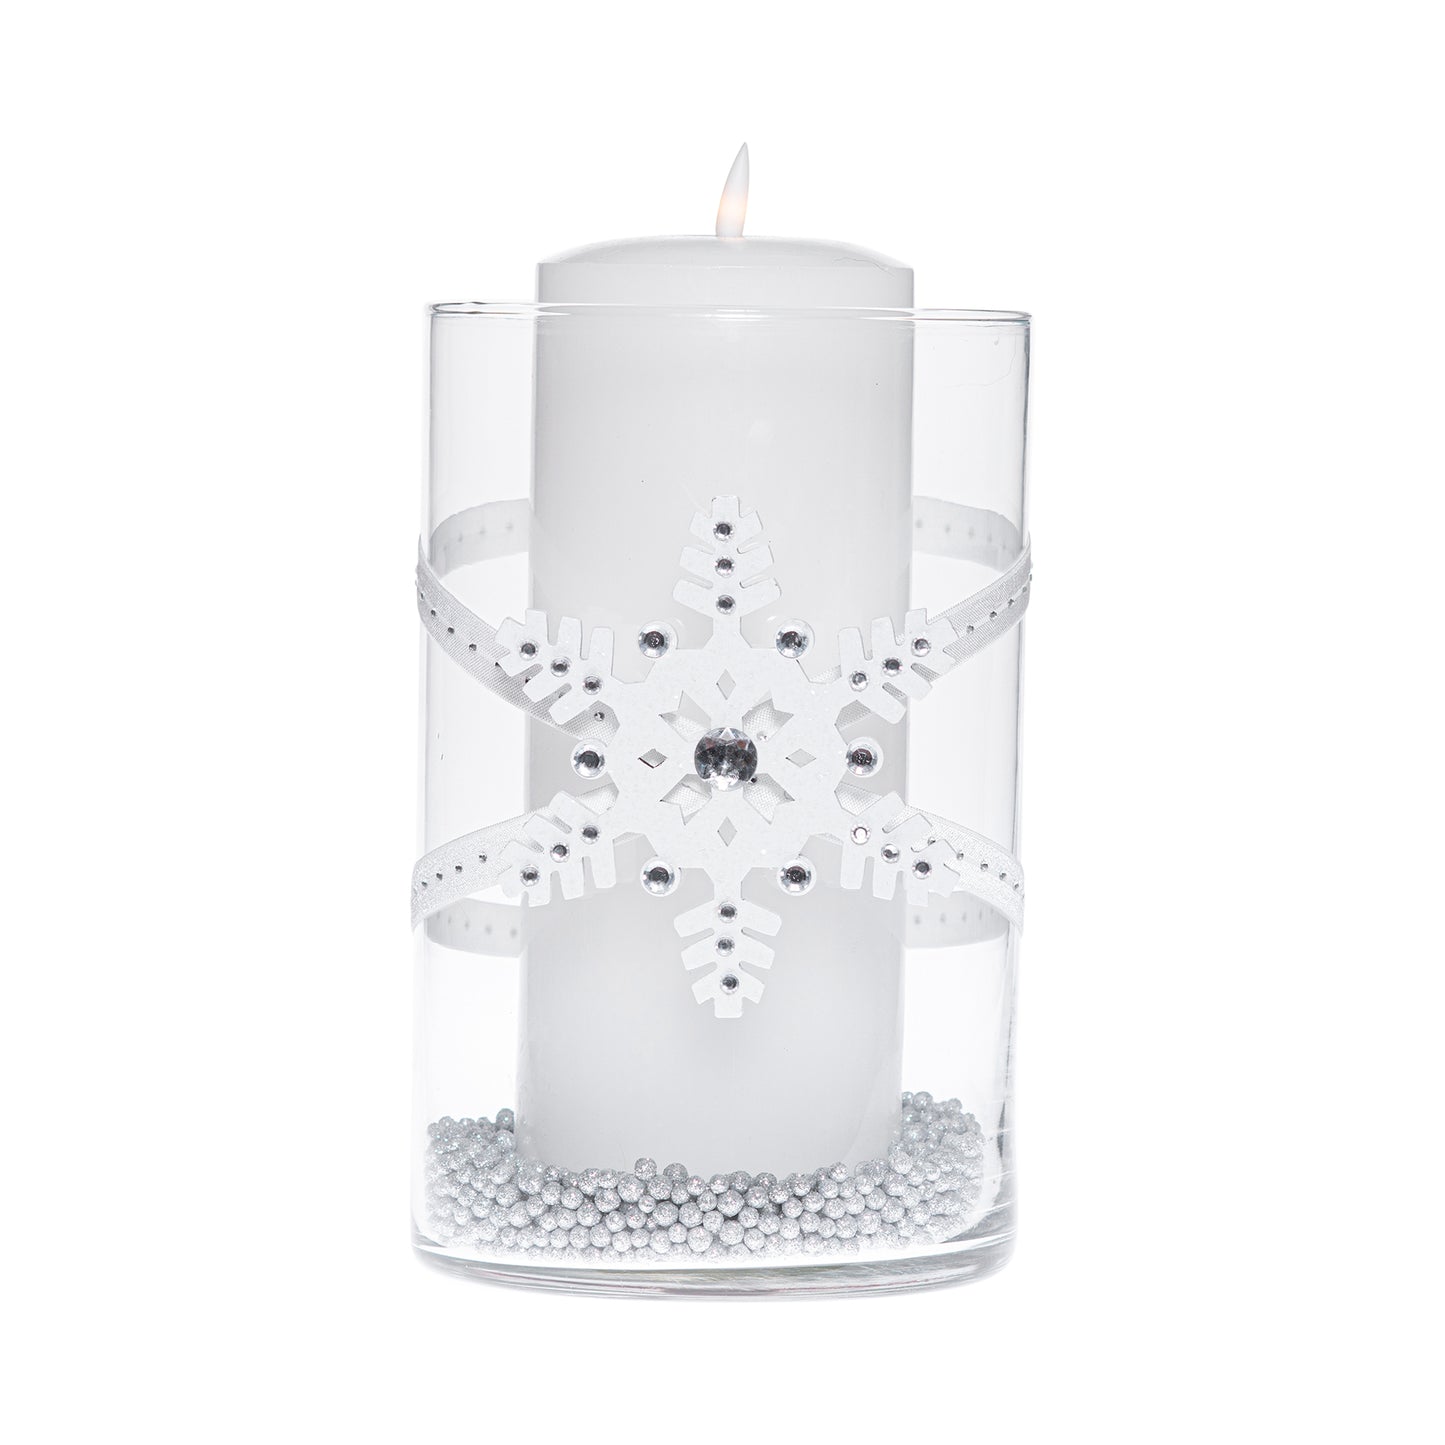 6" x 10" Cylinder White Silver Rhinestone 1X 2 White Gem Wooden Snowflake Holiday Collection Complete Set FREE SHIPPING